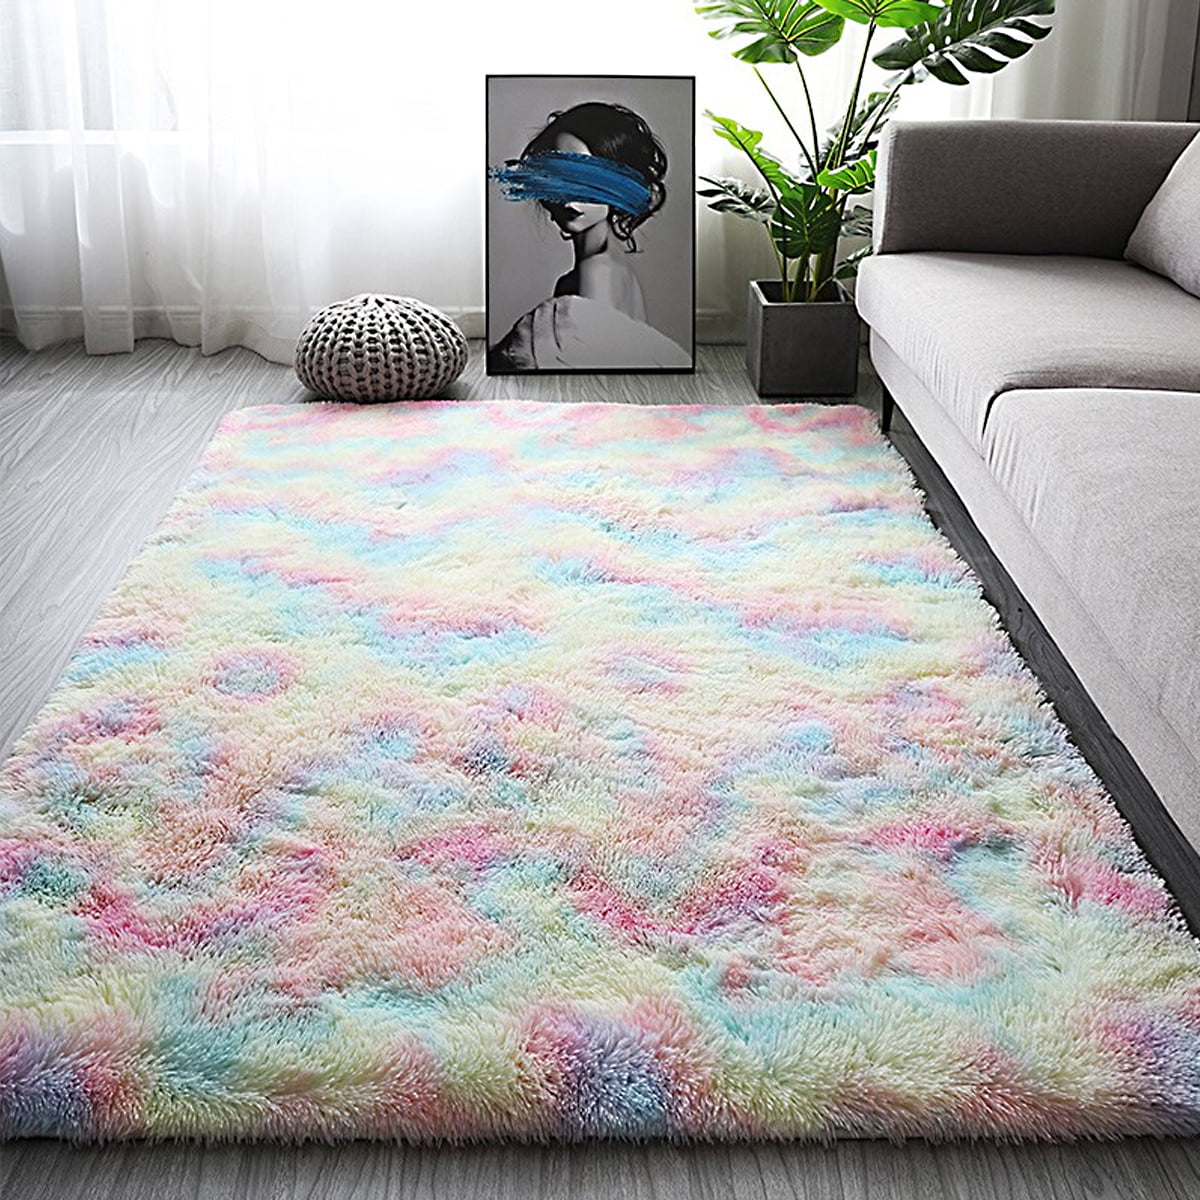 Skid-Proof Carpet Rectangle Thick Floor Rugs Play Mat Home Rug soft Mat Pat 2021 